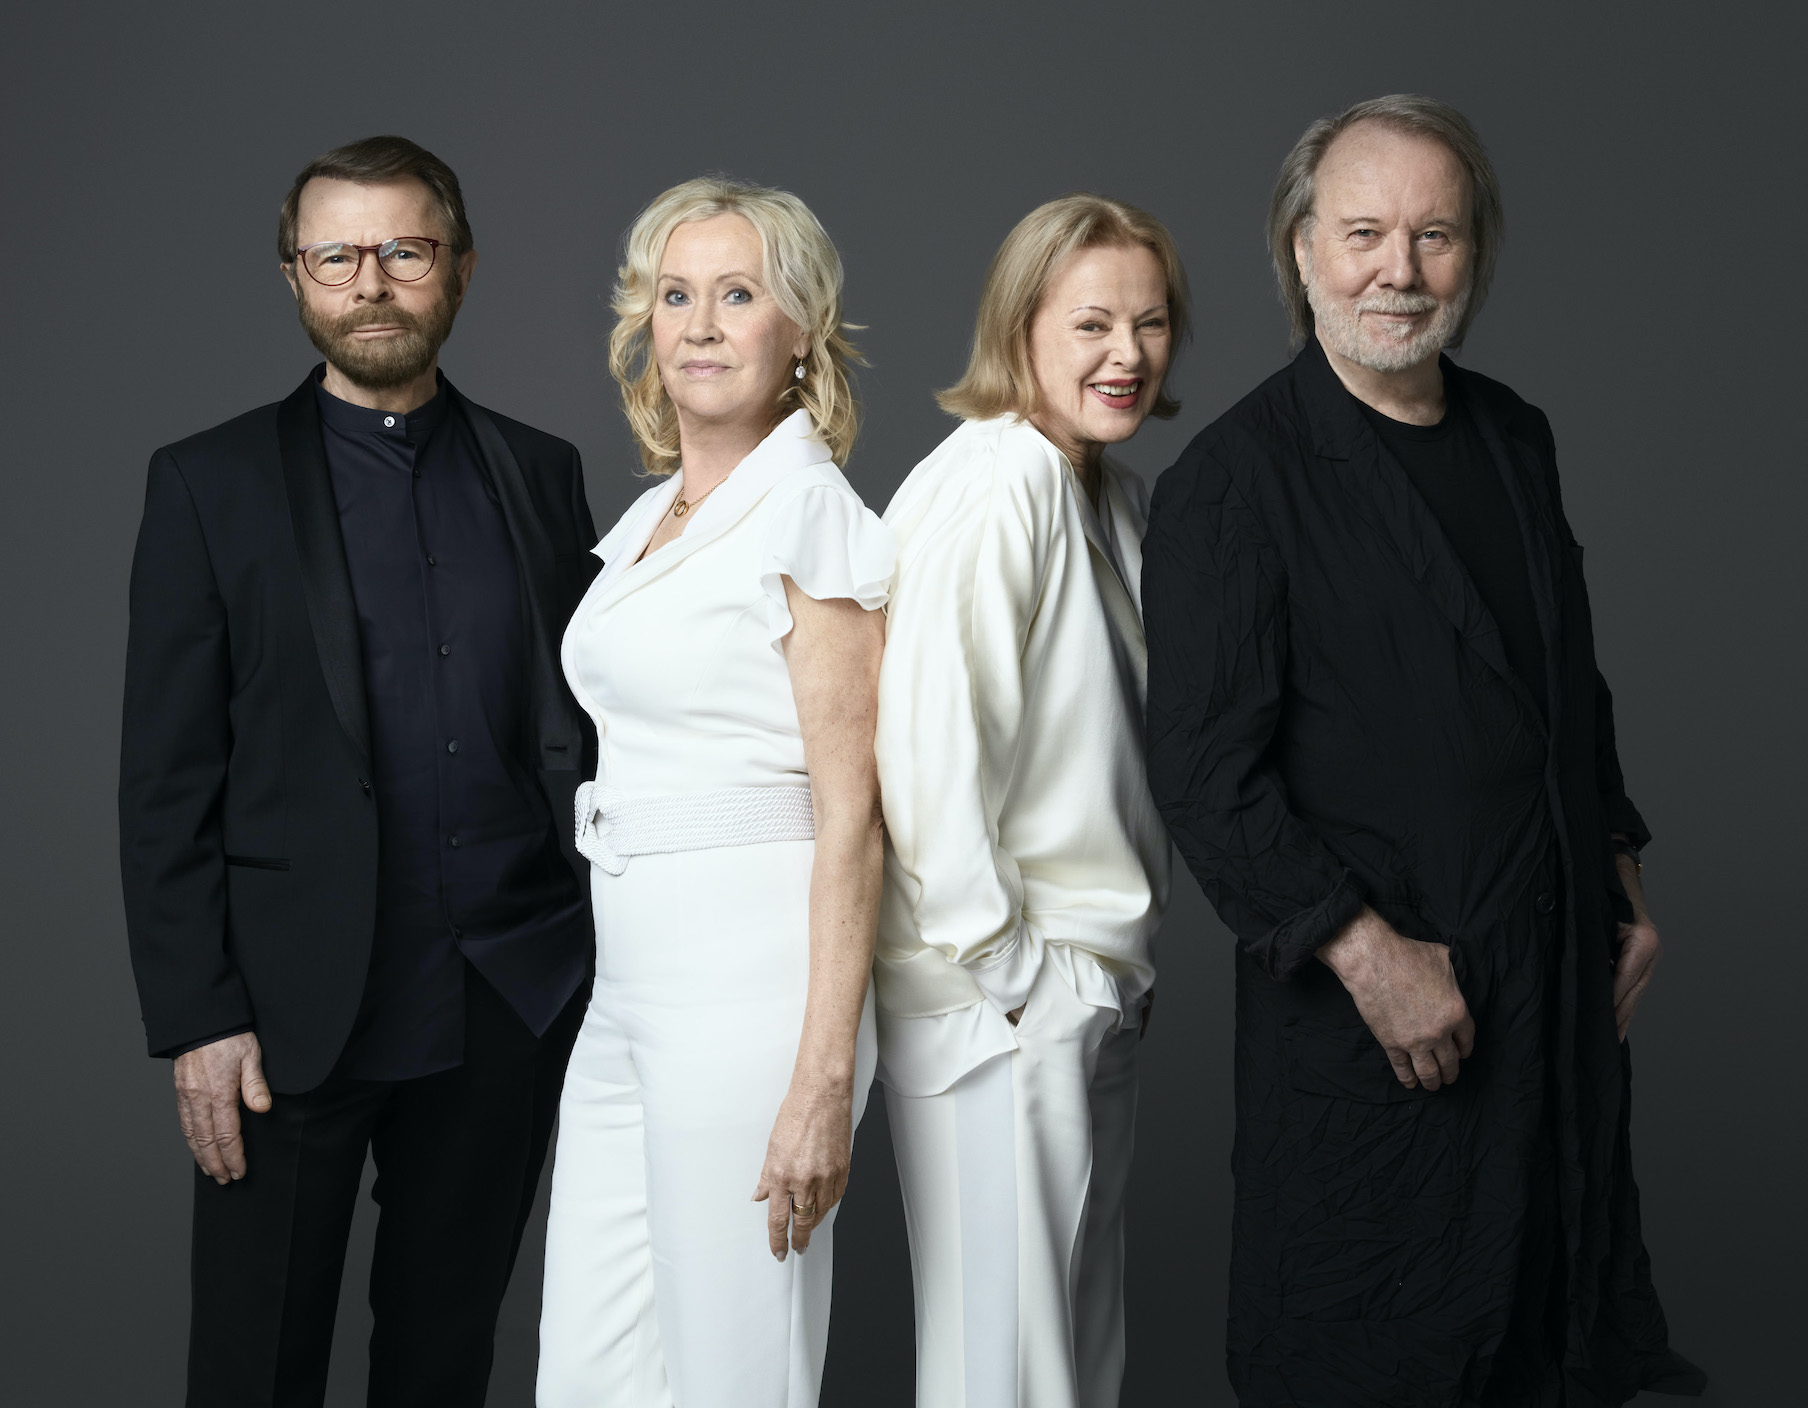 ABBA (Photo credit: Baillie Walsh/courtesy of Universal Music Group)